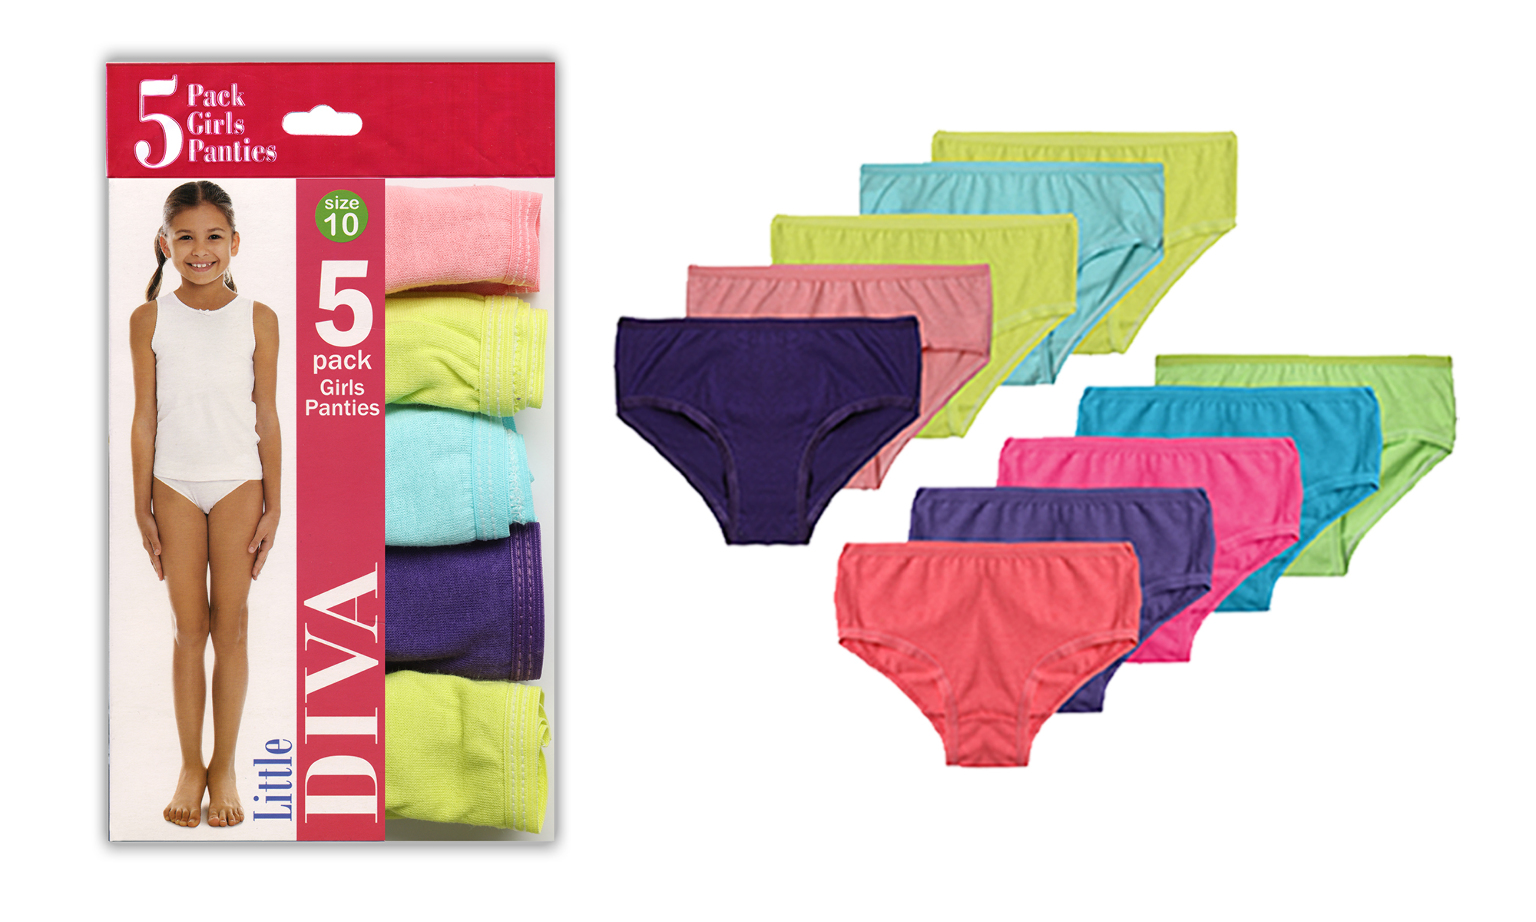 Girl's Panties - Assorted Prints, Size 14, 5 Pack